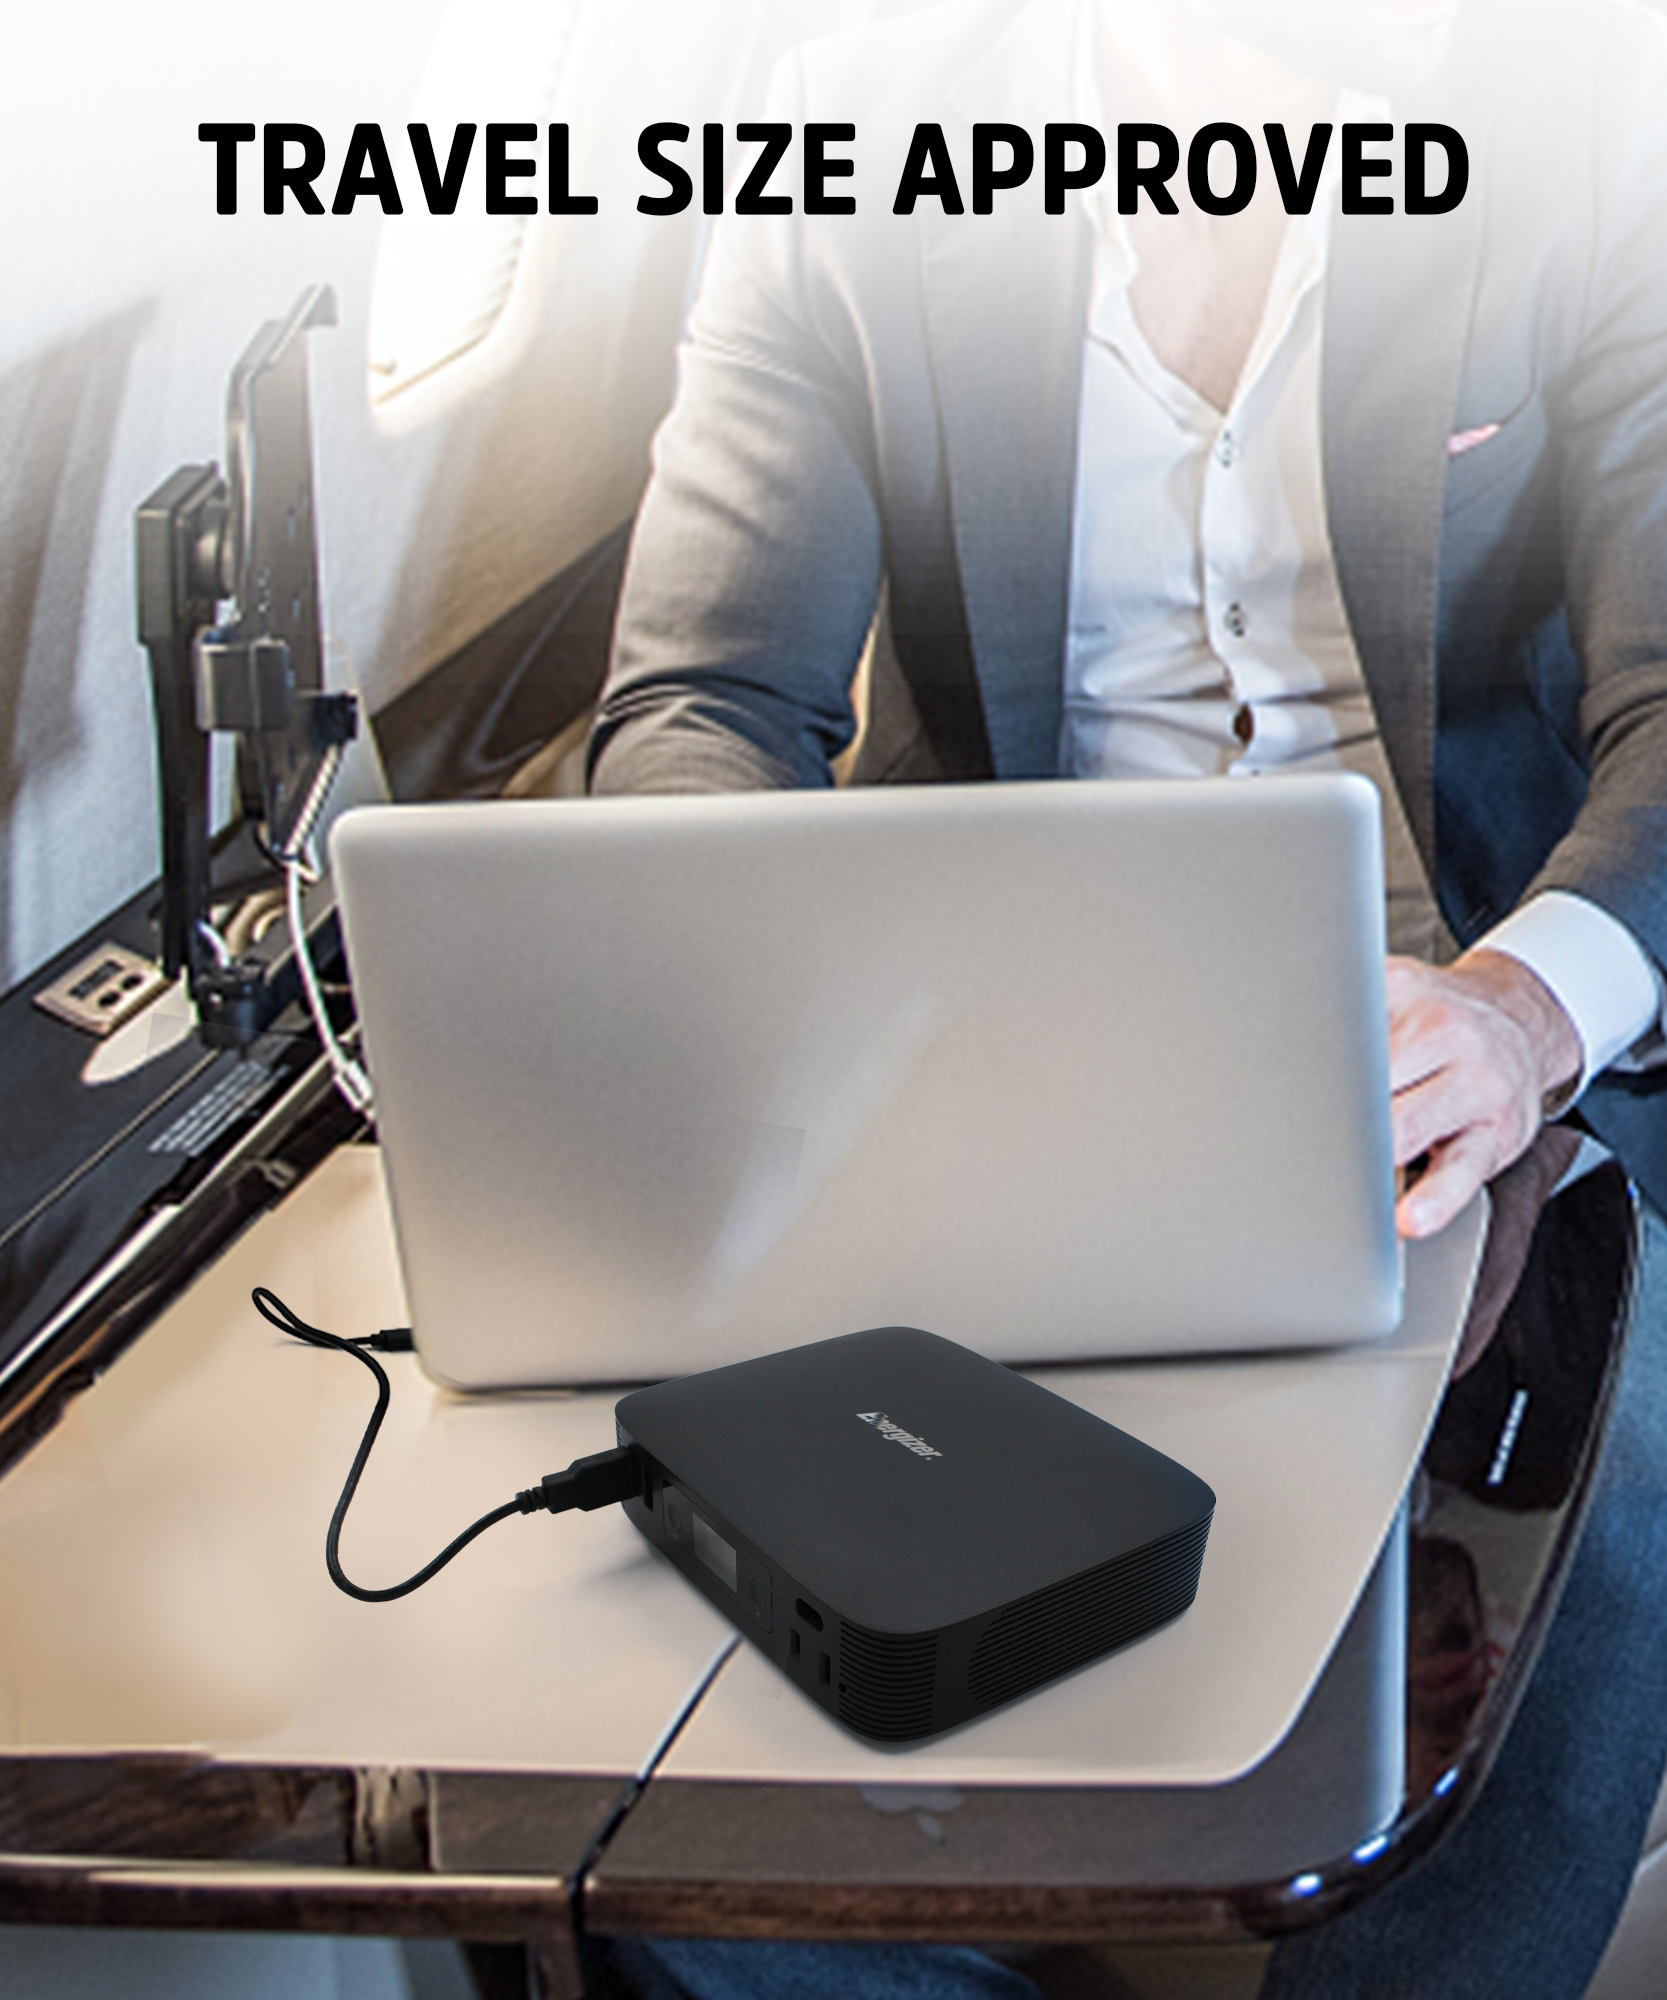 Energizer PPS100 Portable Power Station charging your laptop, travel size approved, mobile power supply